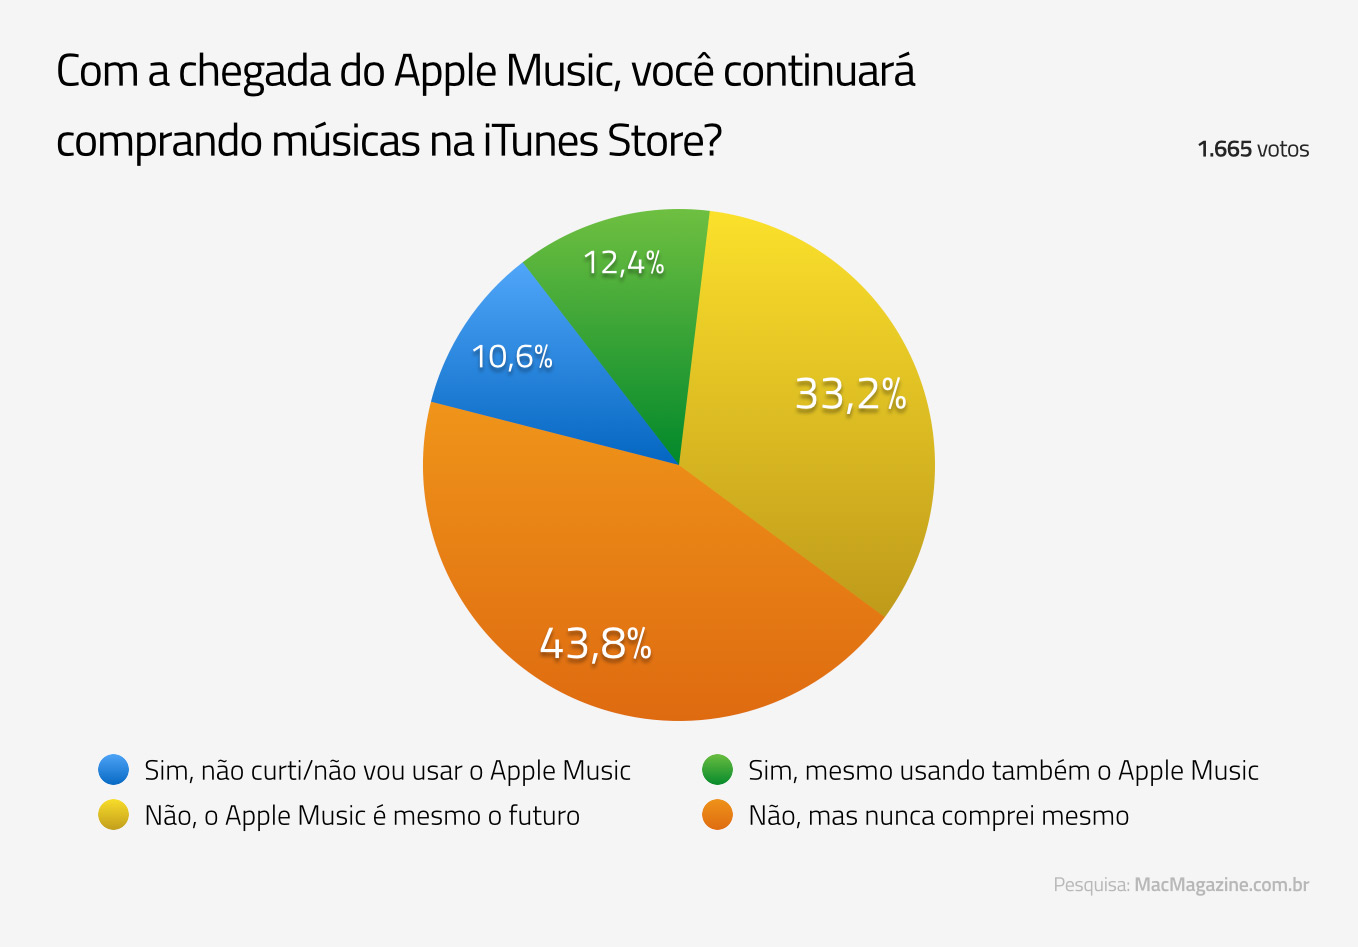 Poll: less than a quarter of MacMagazine readers intend to continue buying music from the iTunes Store